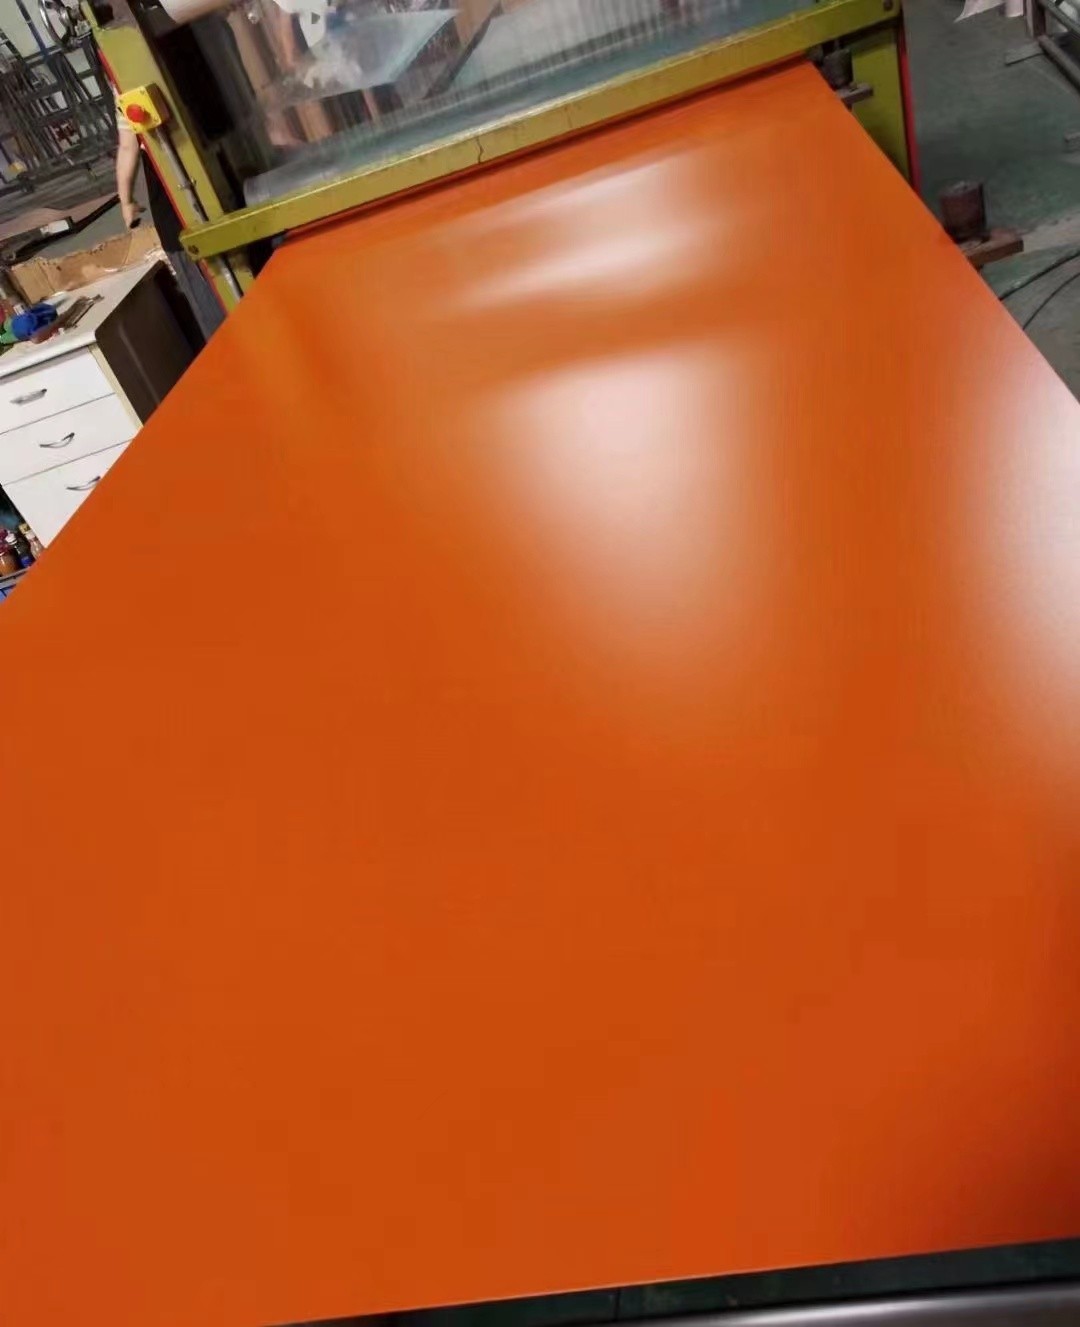 Can customized aluminum products be painted or coated in different colors?